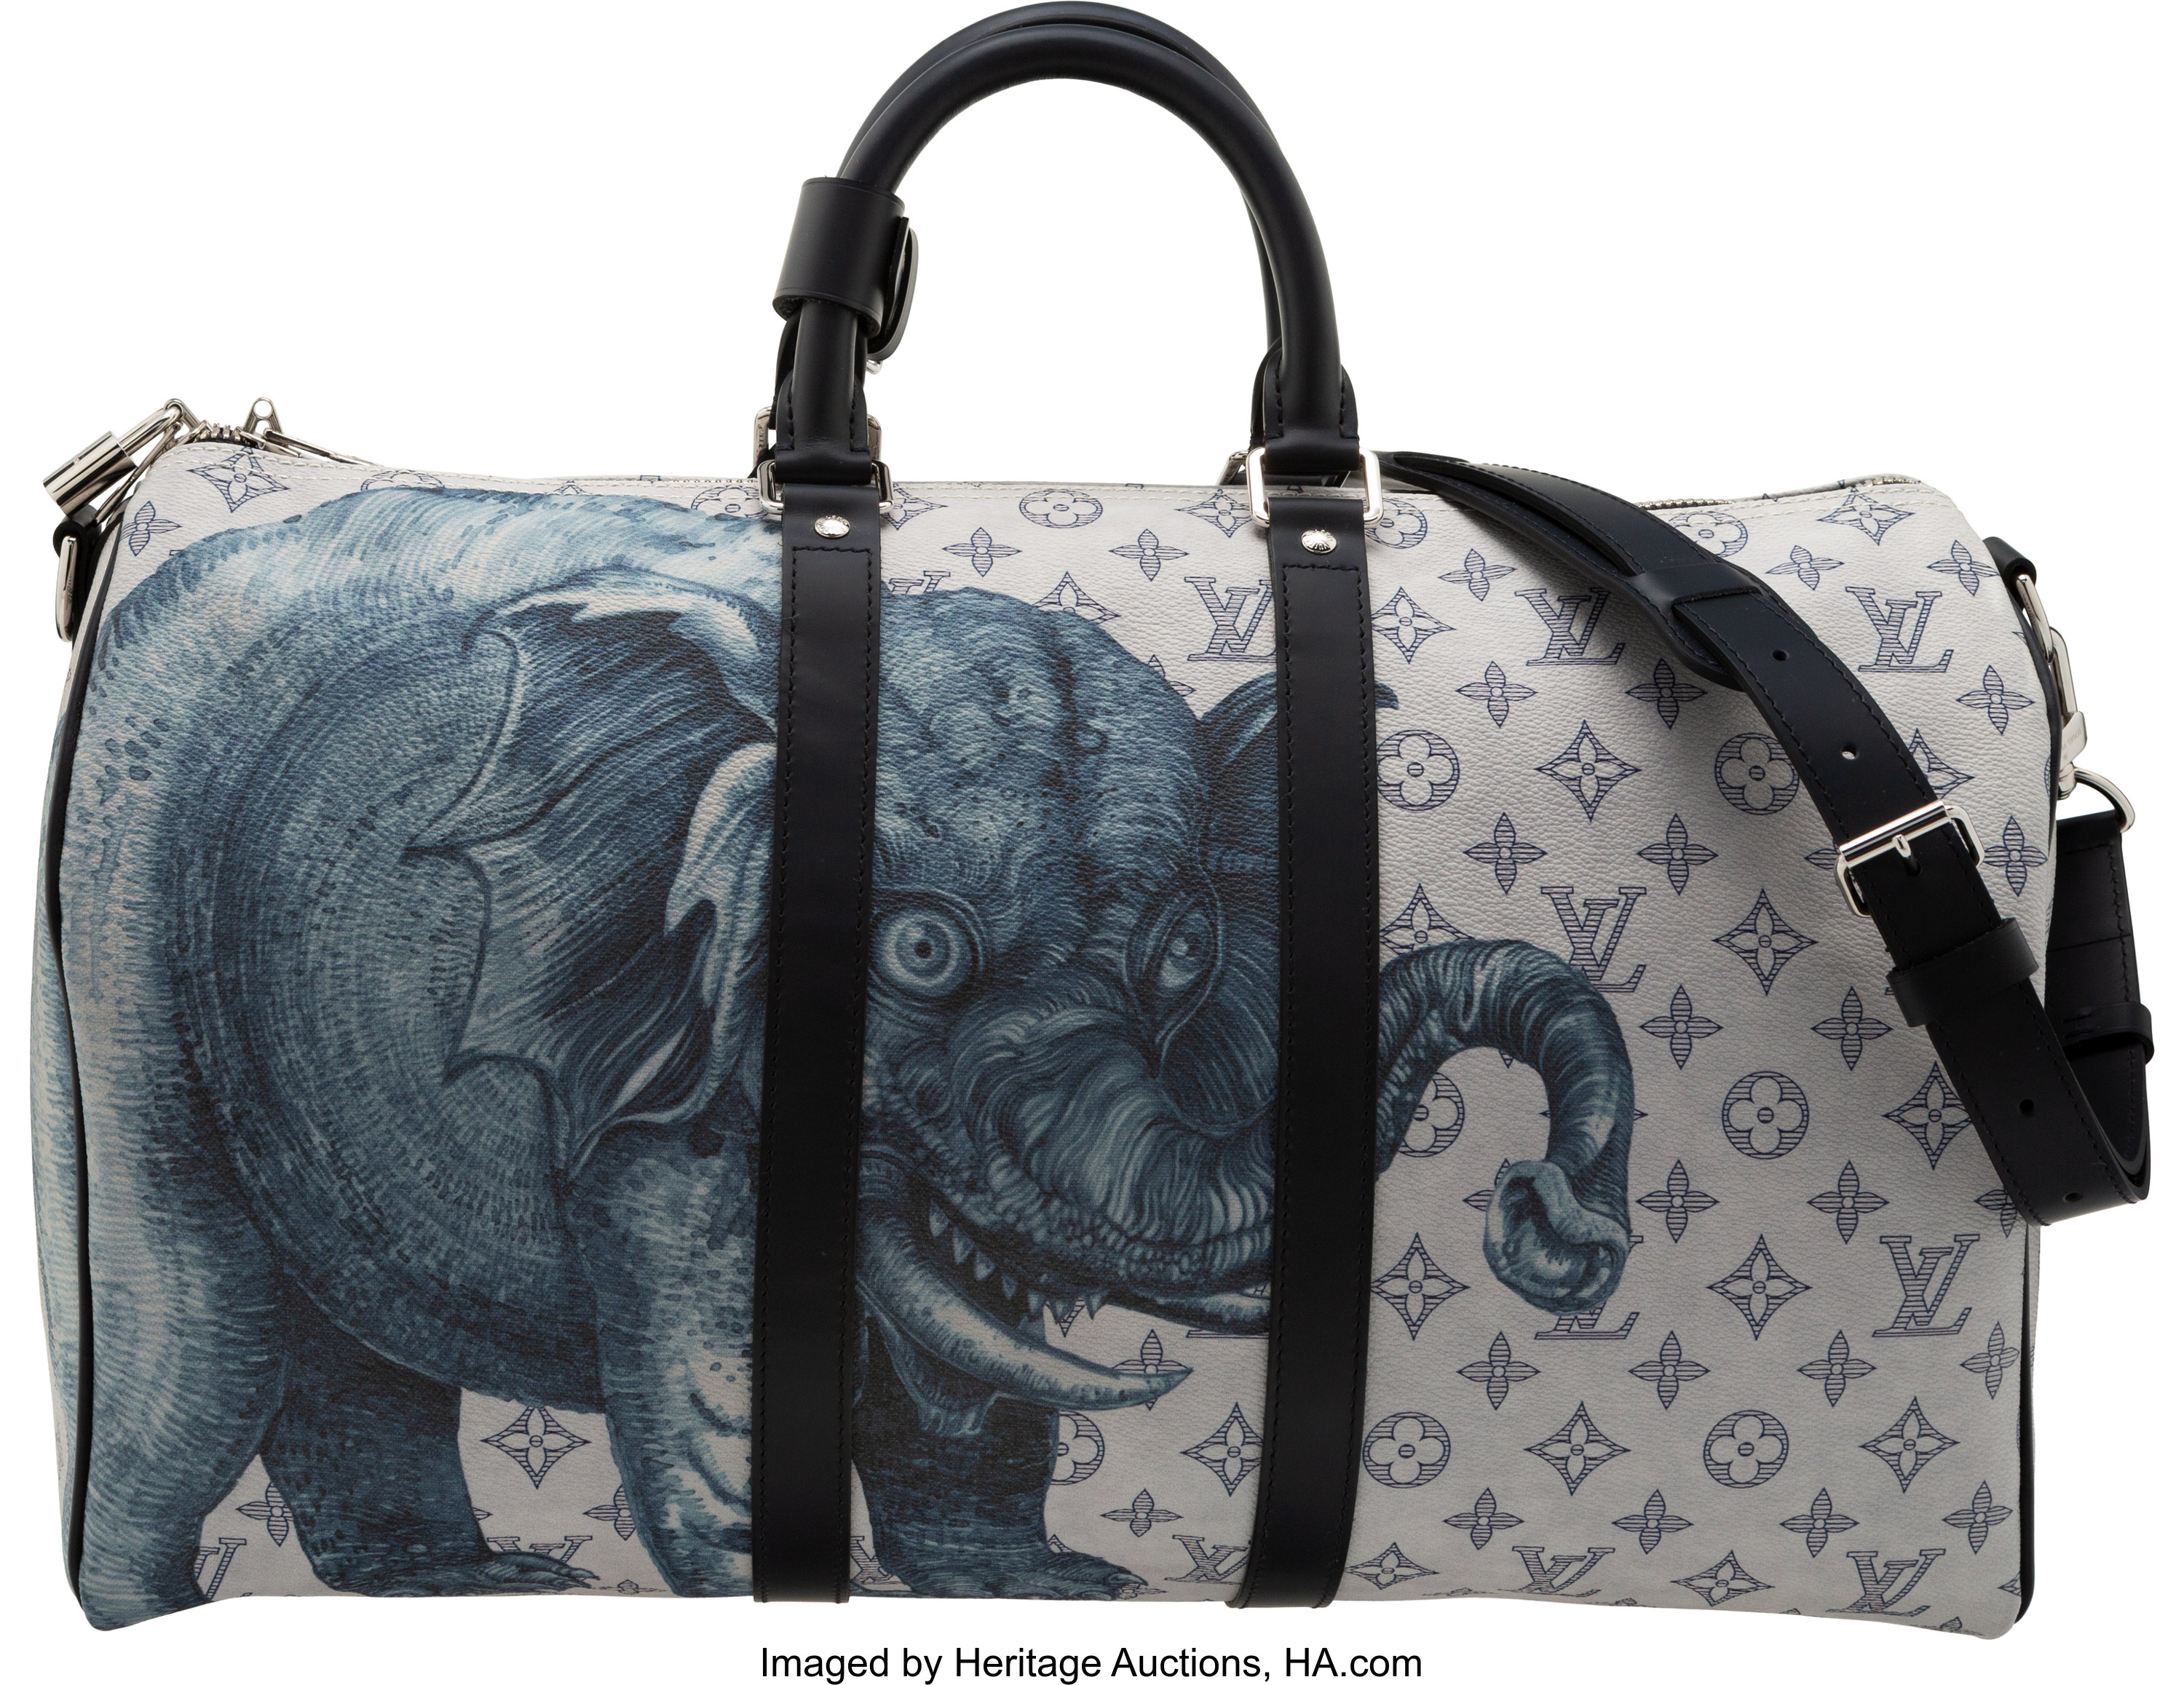 Louis Vuitton teams up with the Chapman brothers again